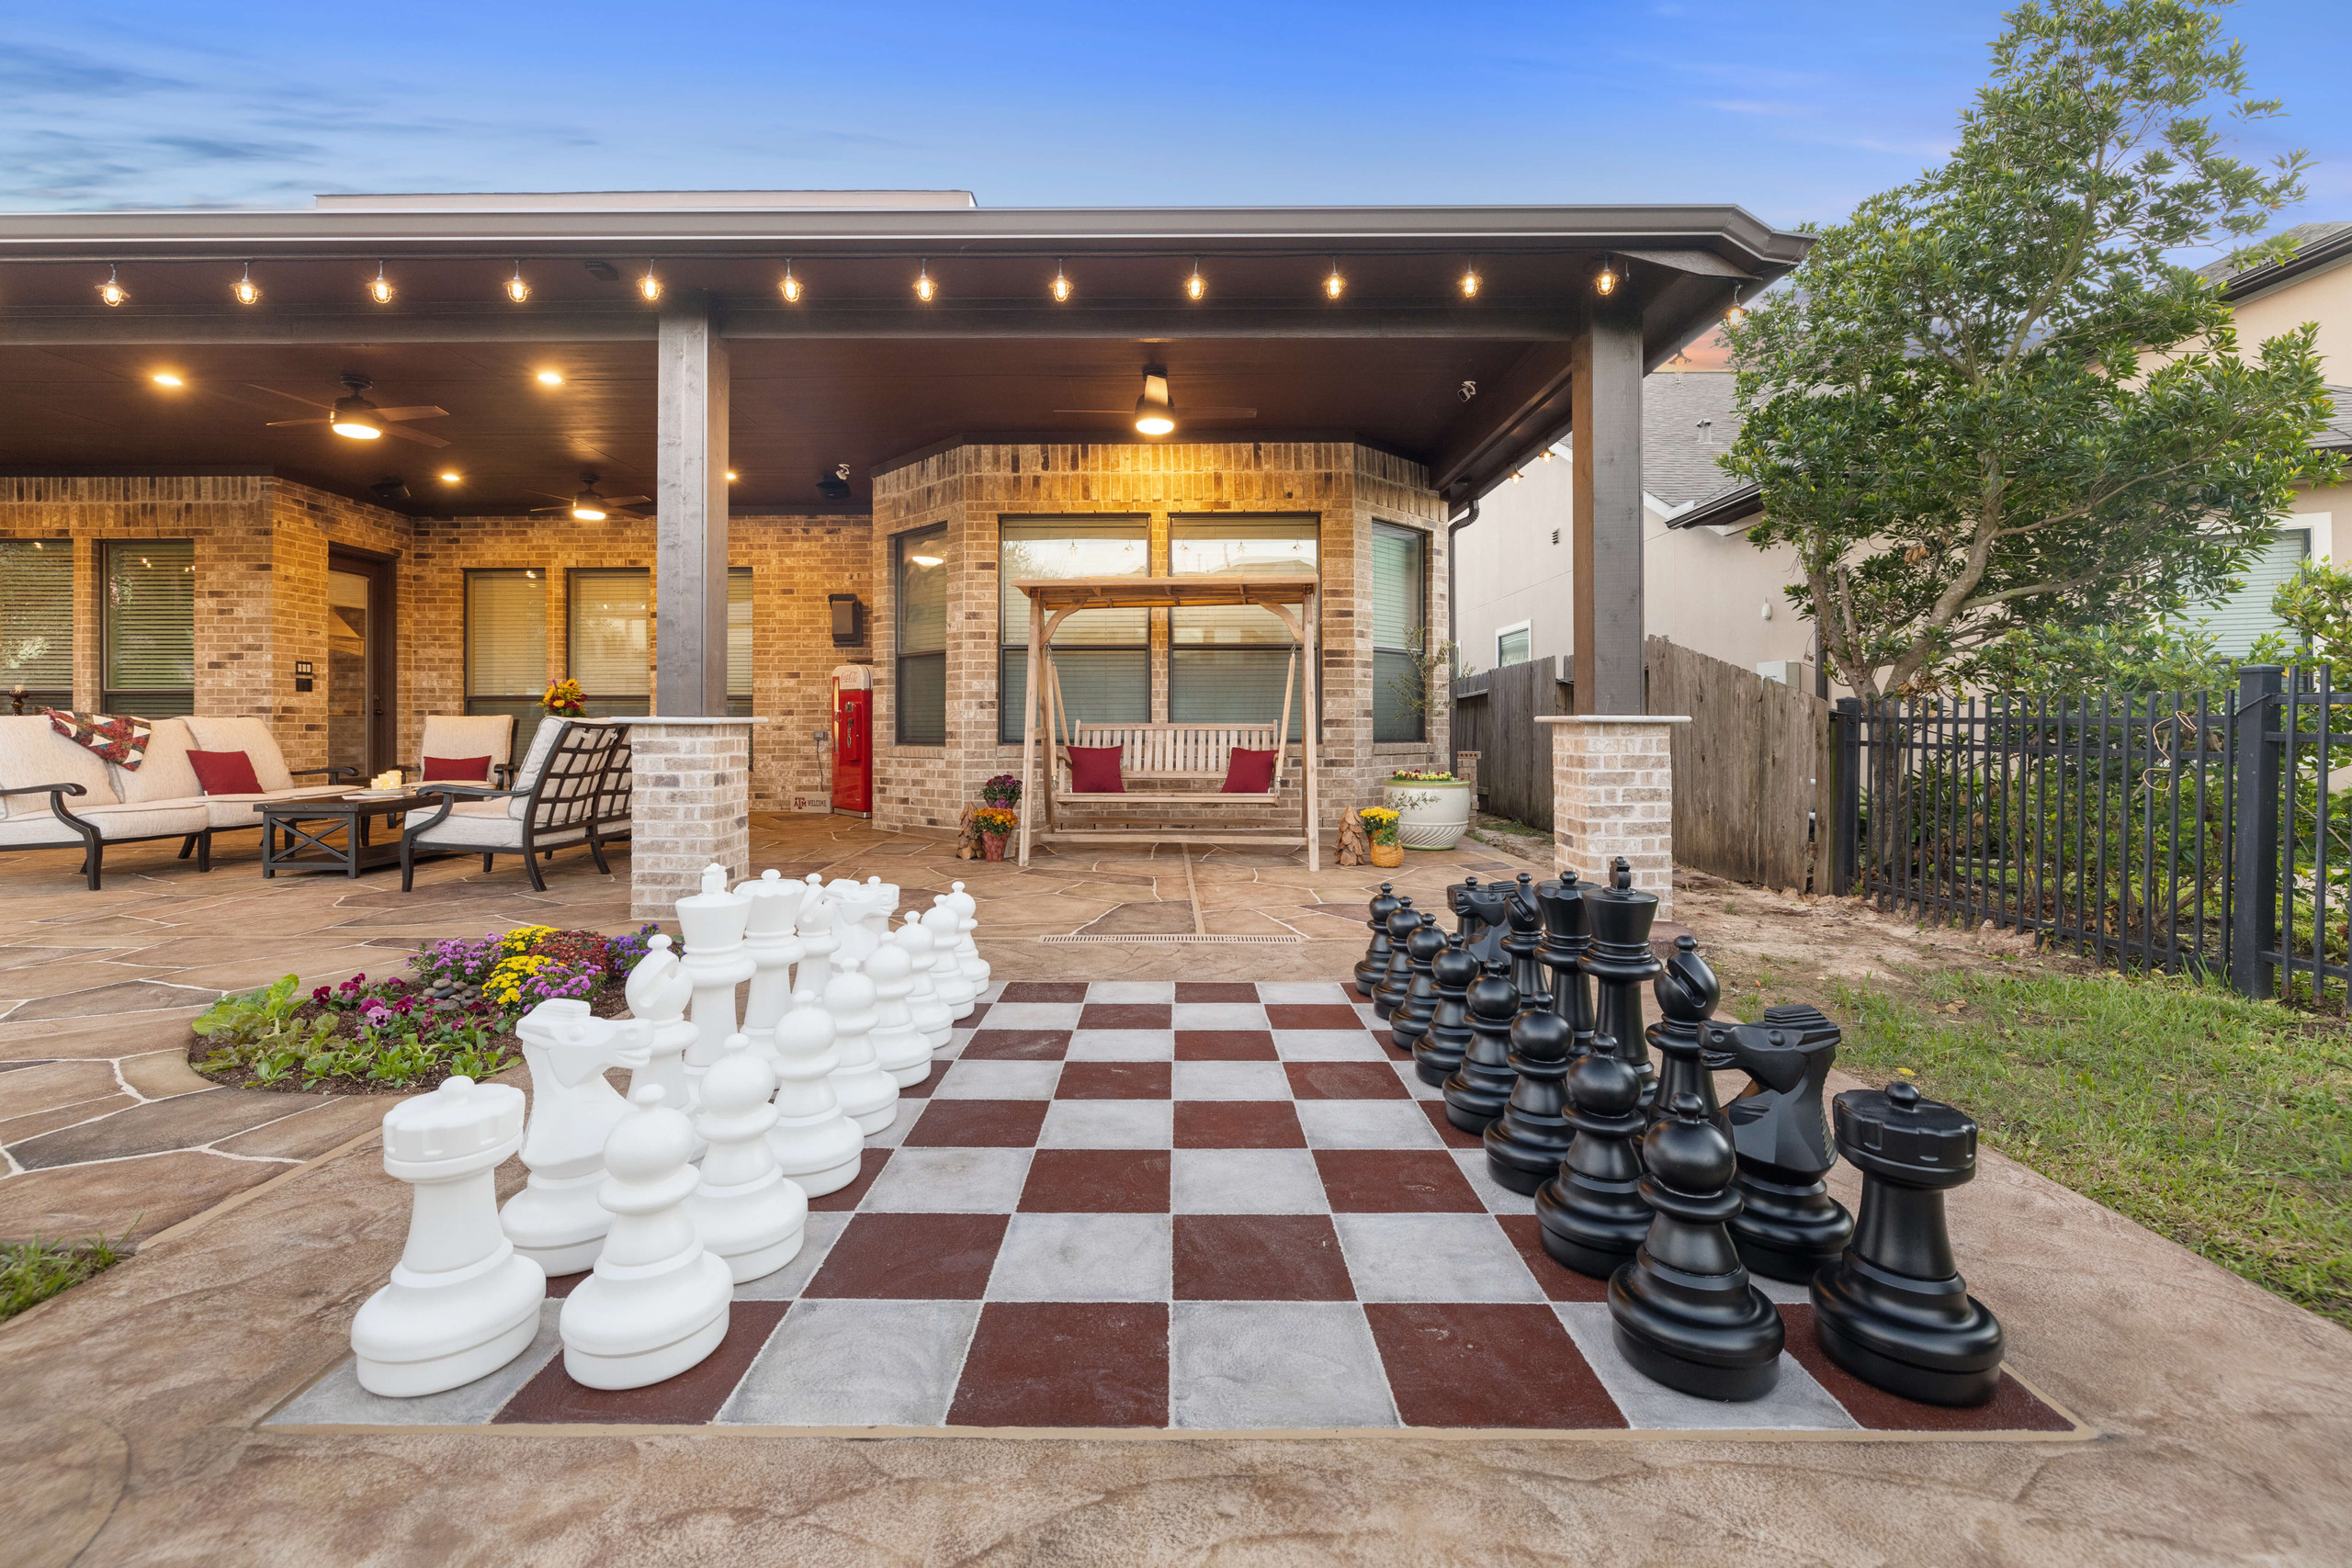 Carvestone design patio with outdoor large chess board idea